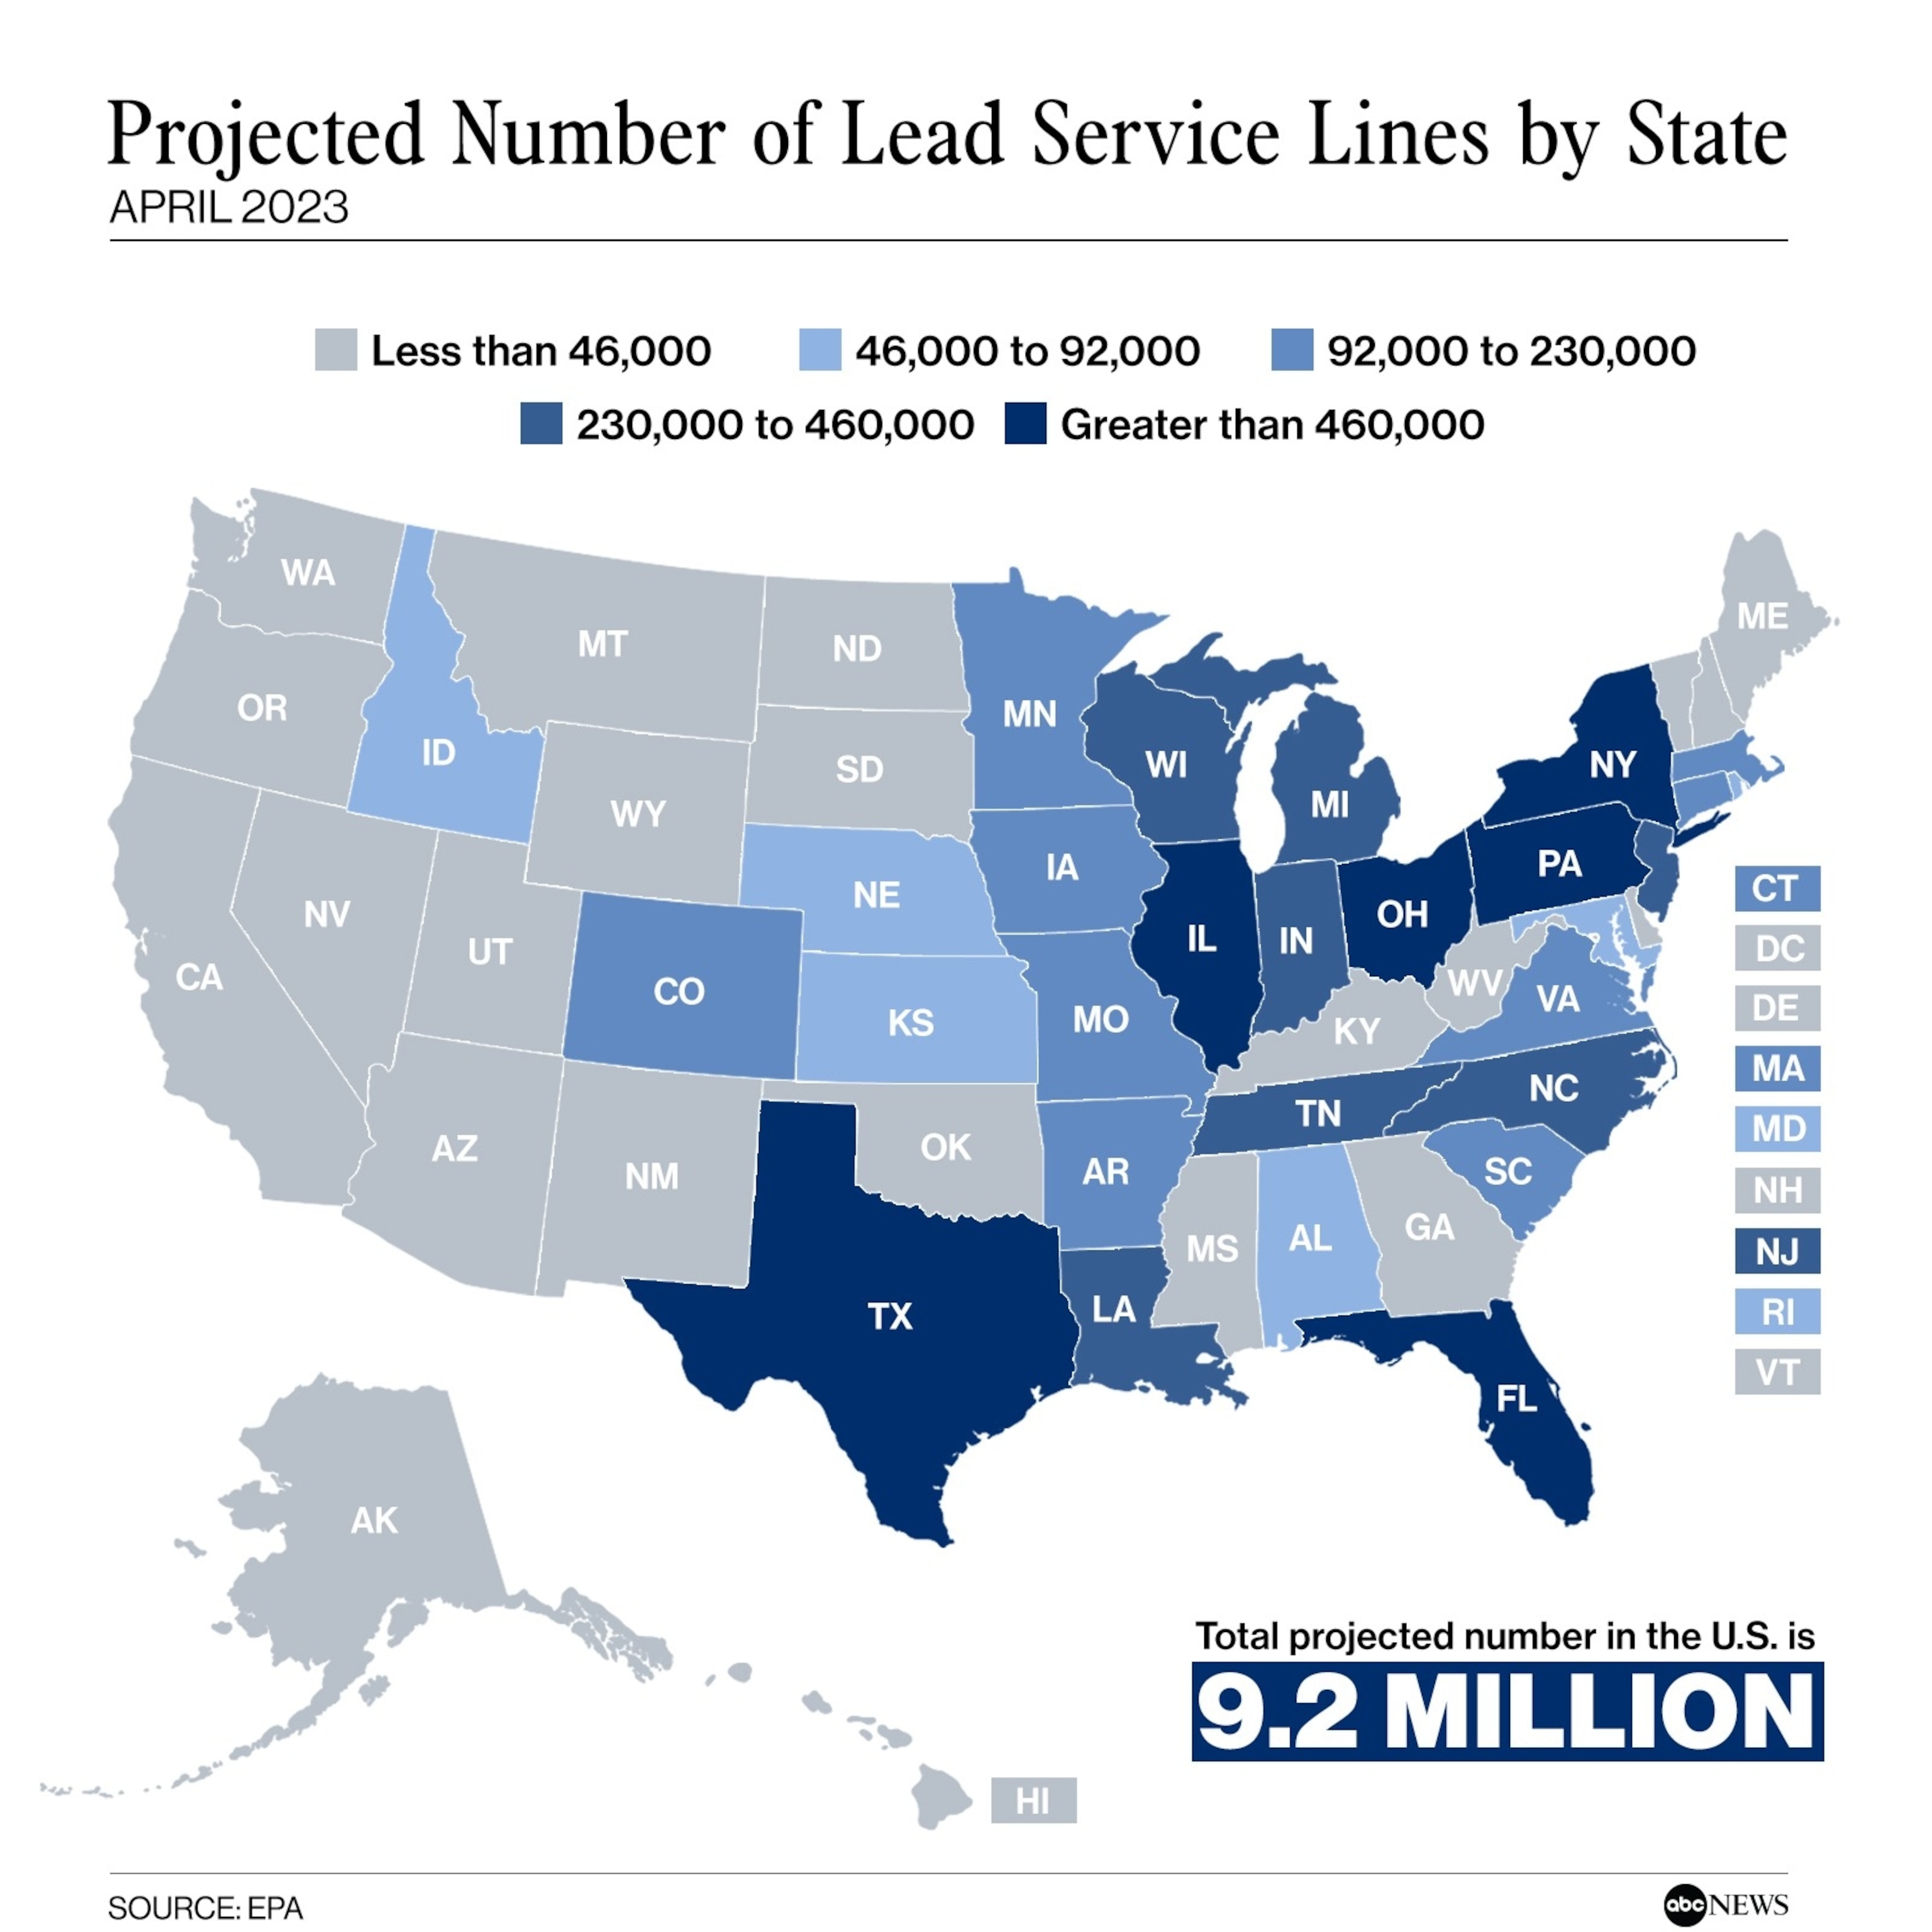 PHOTO: Projected Number of Lead Service Lines by State